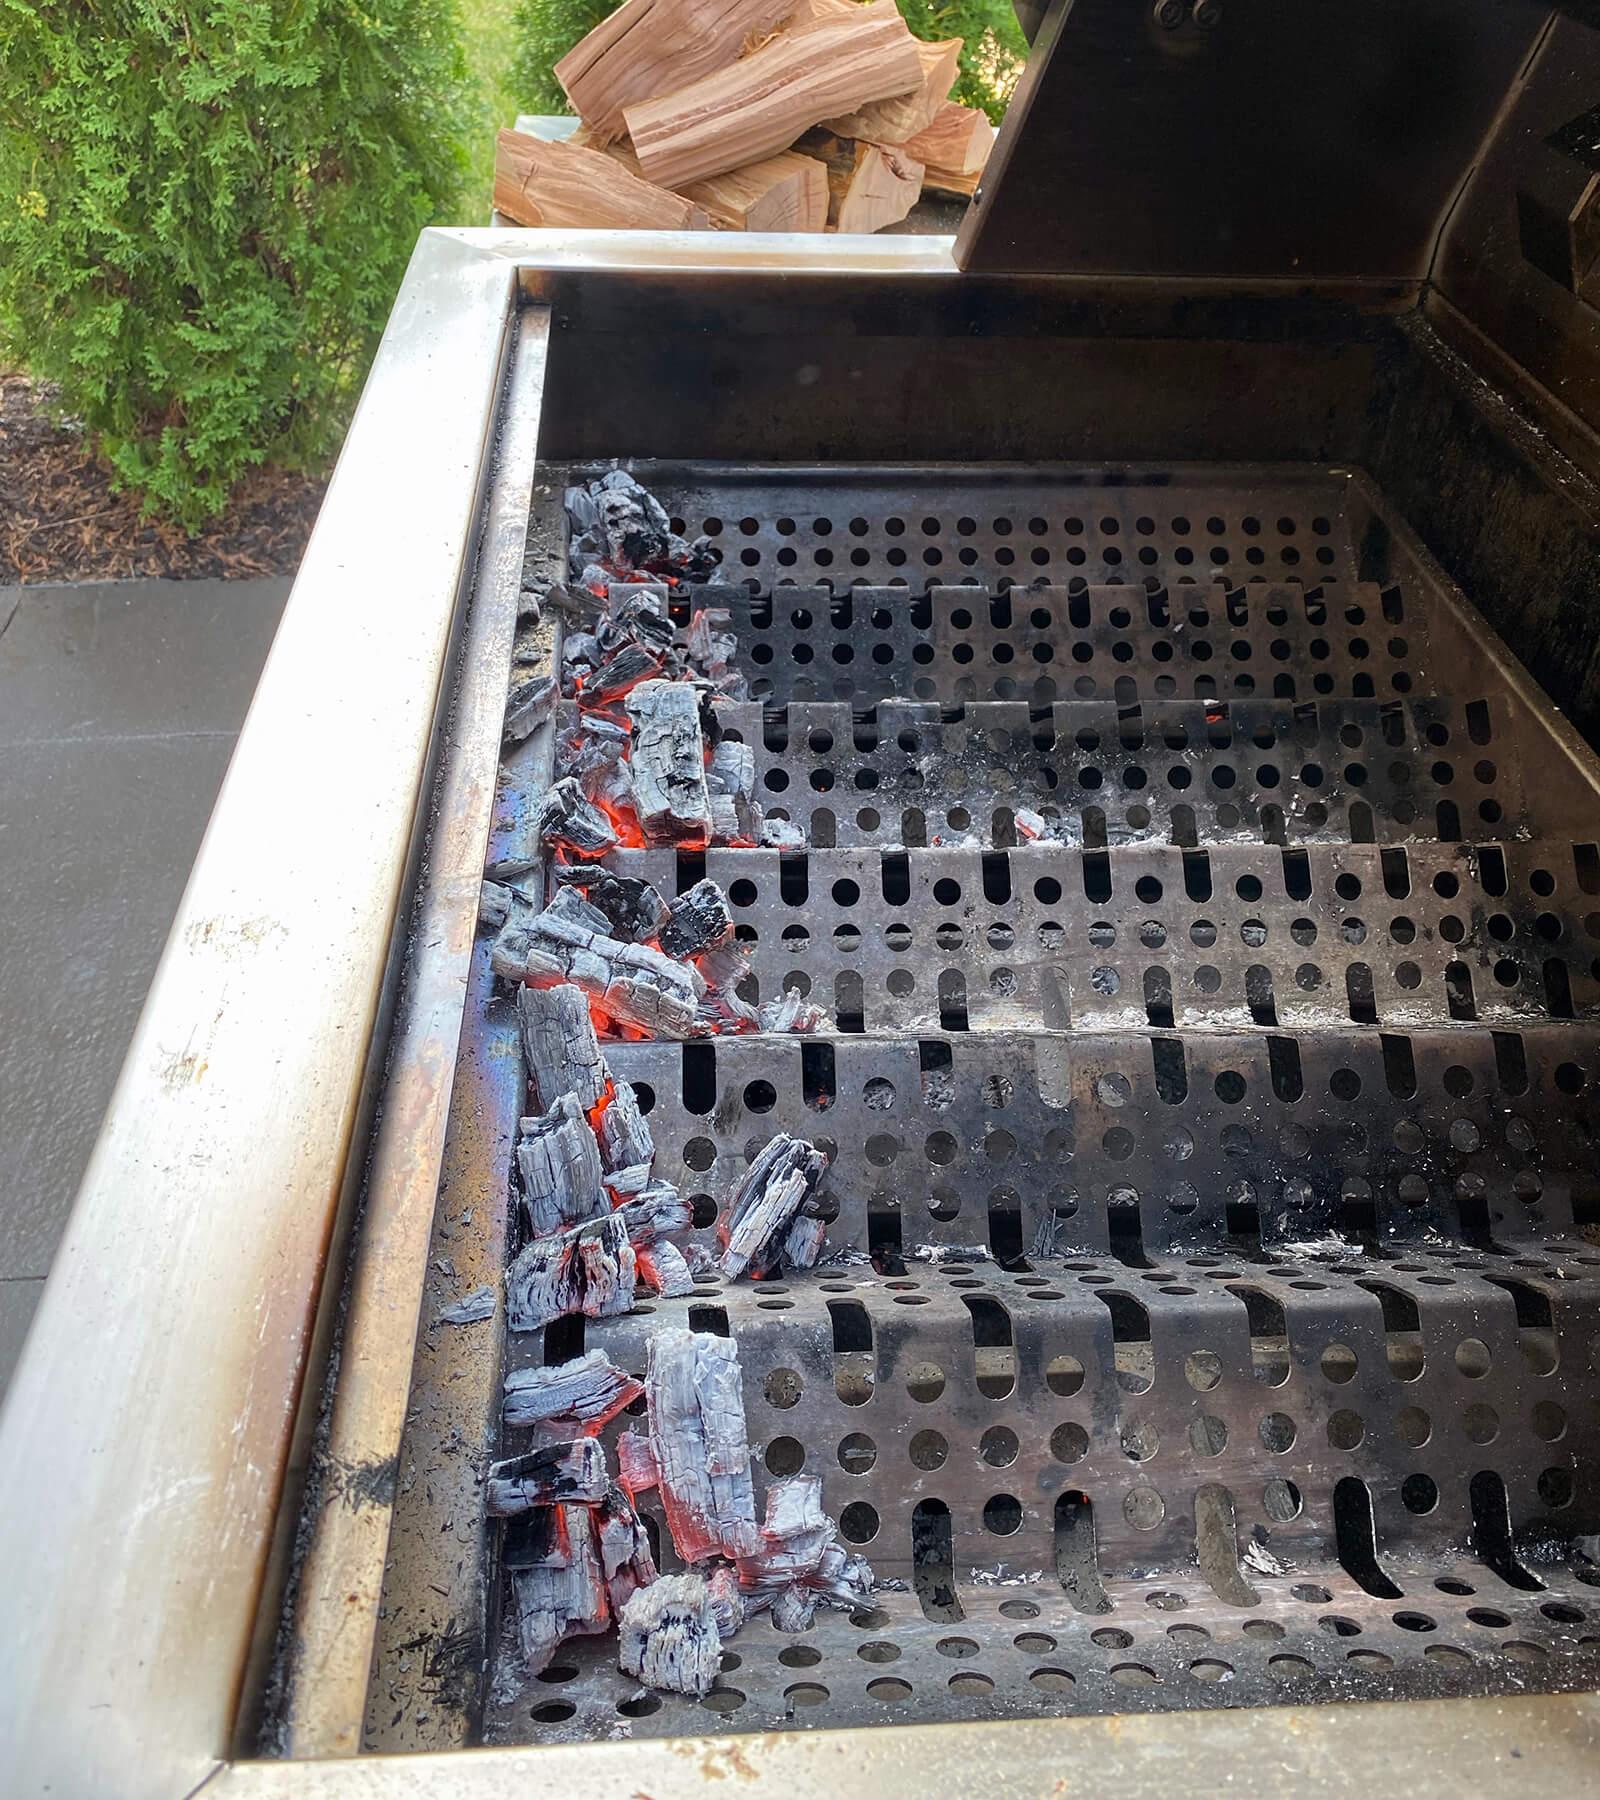 hot charcoal under grill surface